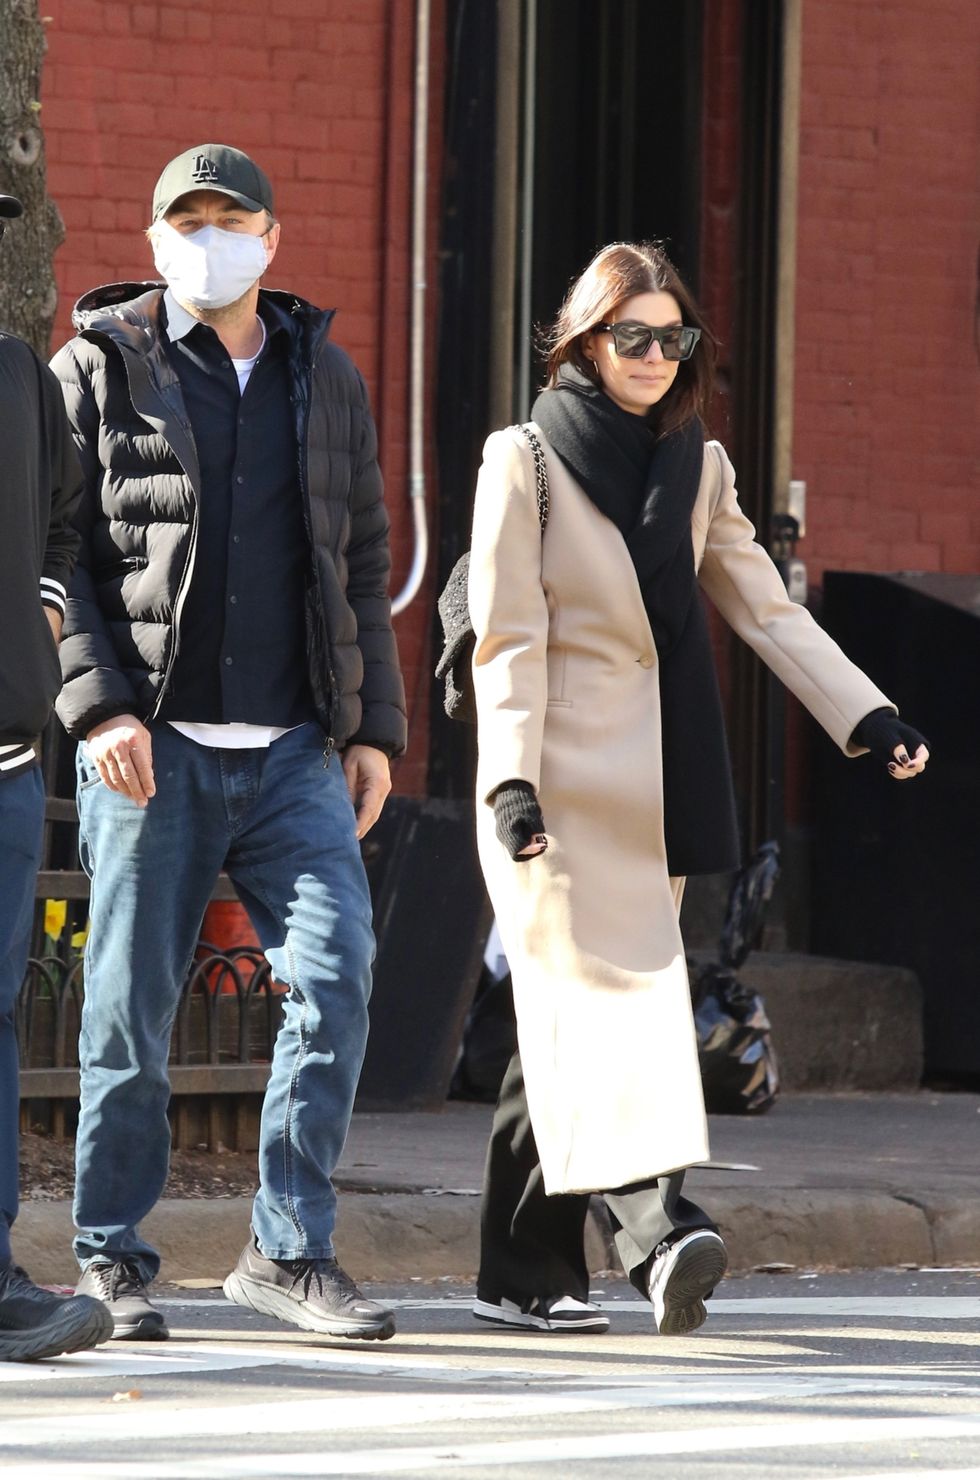 leo and camila walking in new york